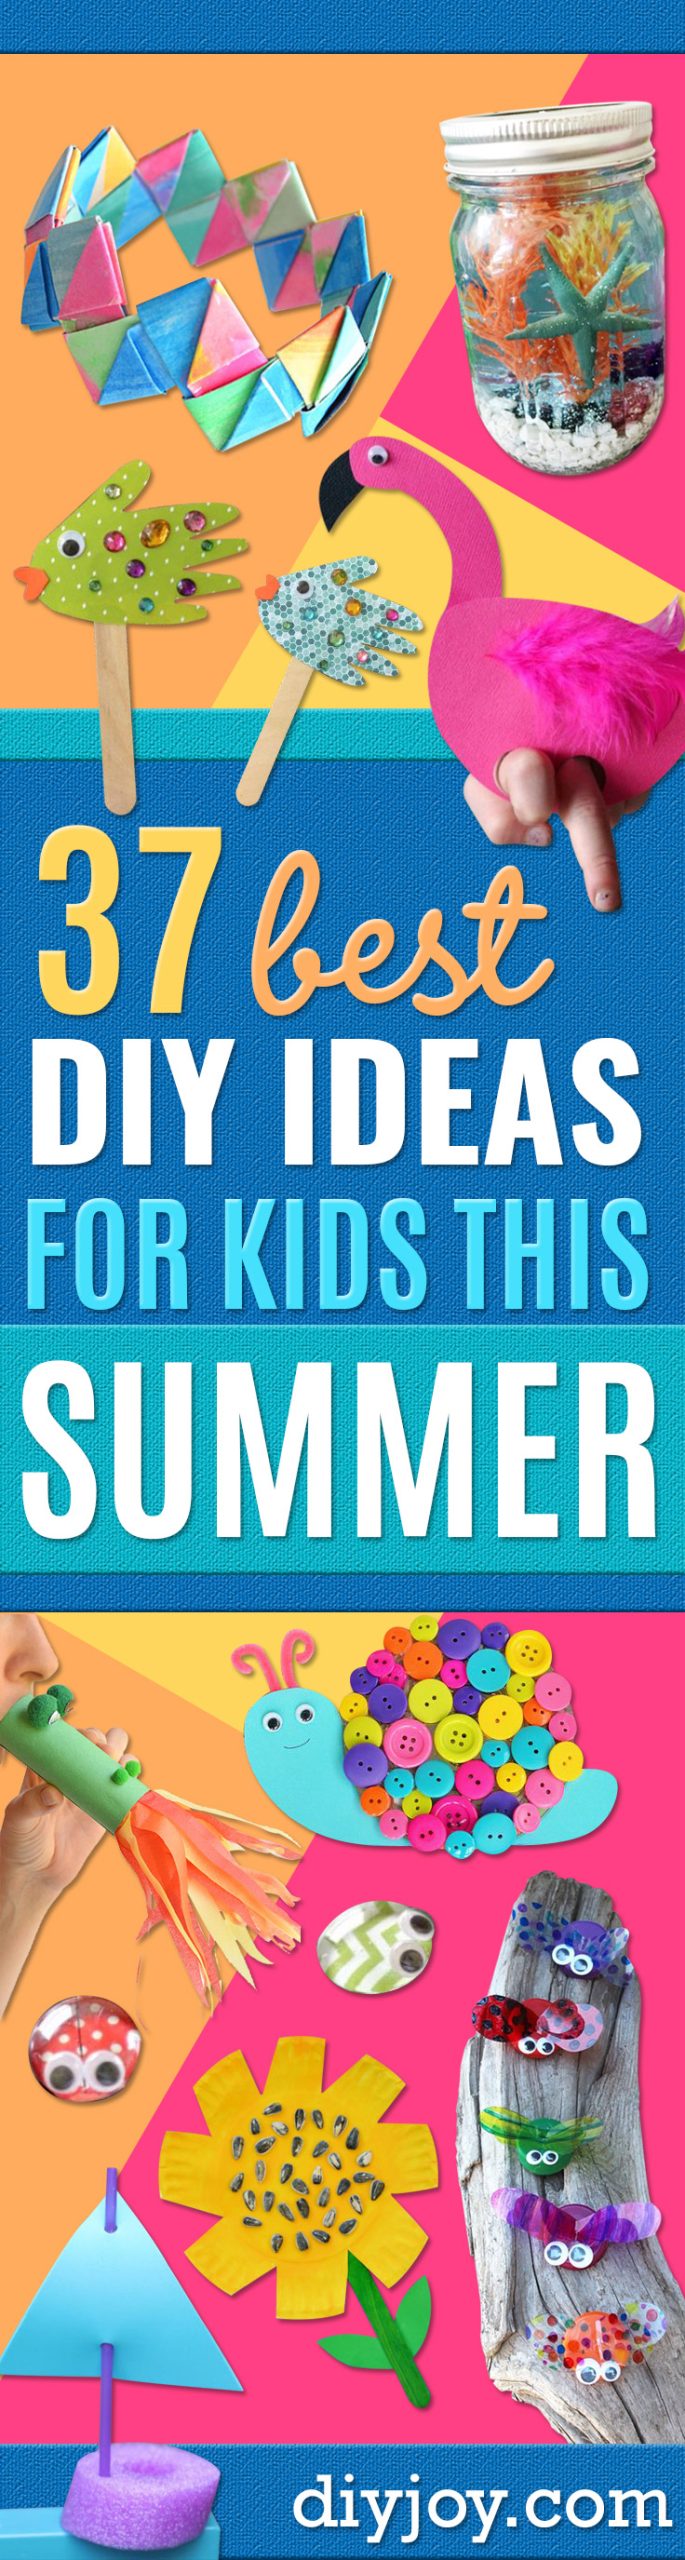 What Is A Good Diy Project For A Child